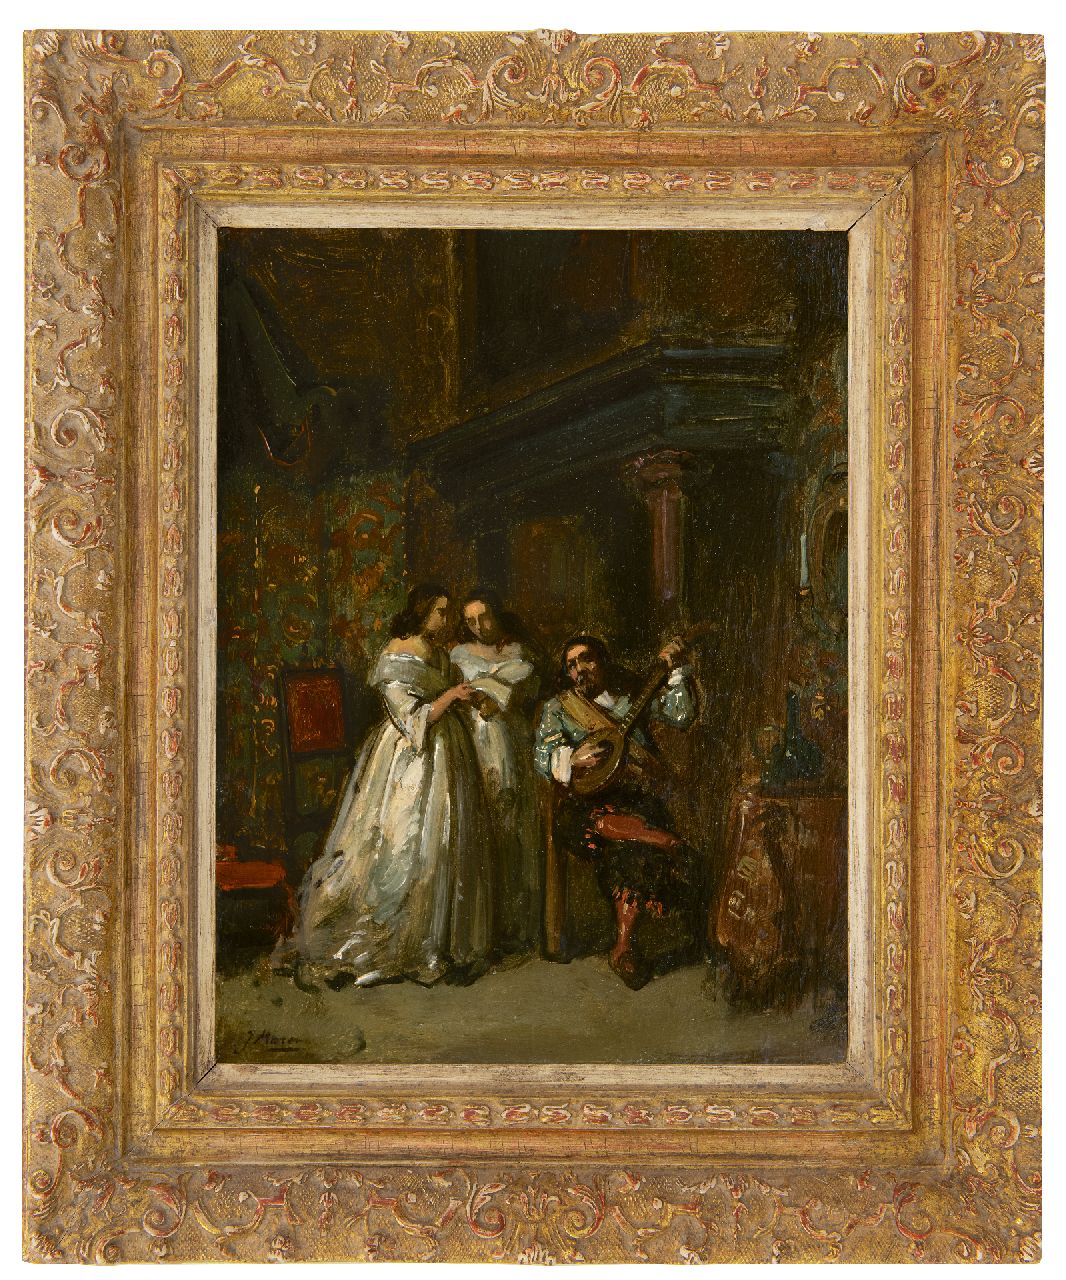 Maris J.H.  | Jacobus Hendricus 'Jacob' Maris | Paintings offered for sale | Romance, oil on paper laid down on panel 30.3 x 23.1 cm, signed l.l. and painted ca. 1854-1855